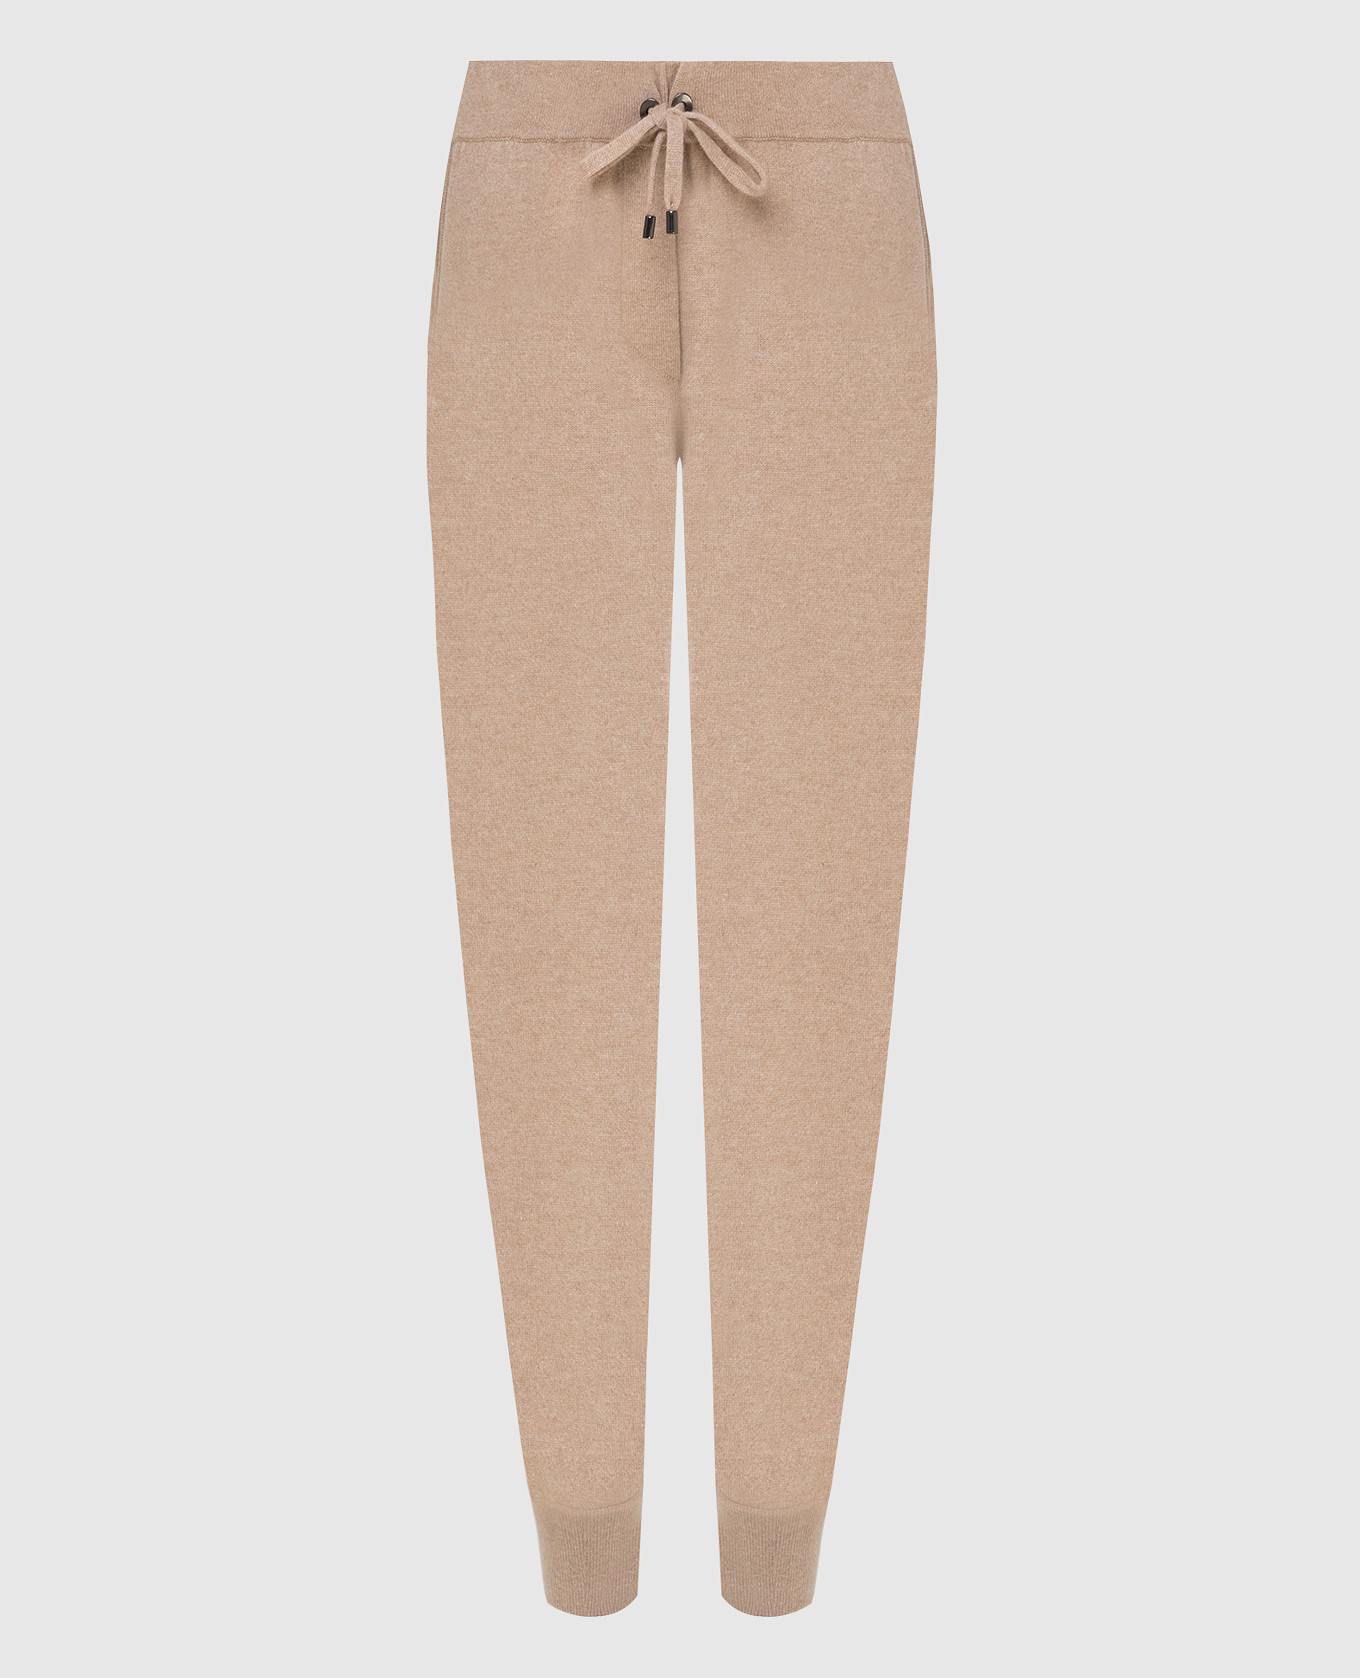 Beige wool, cashmere and silk joggers